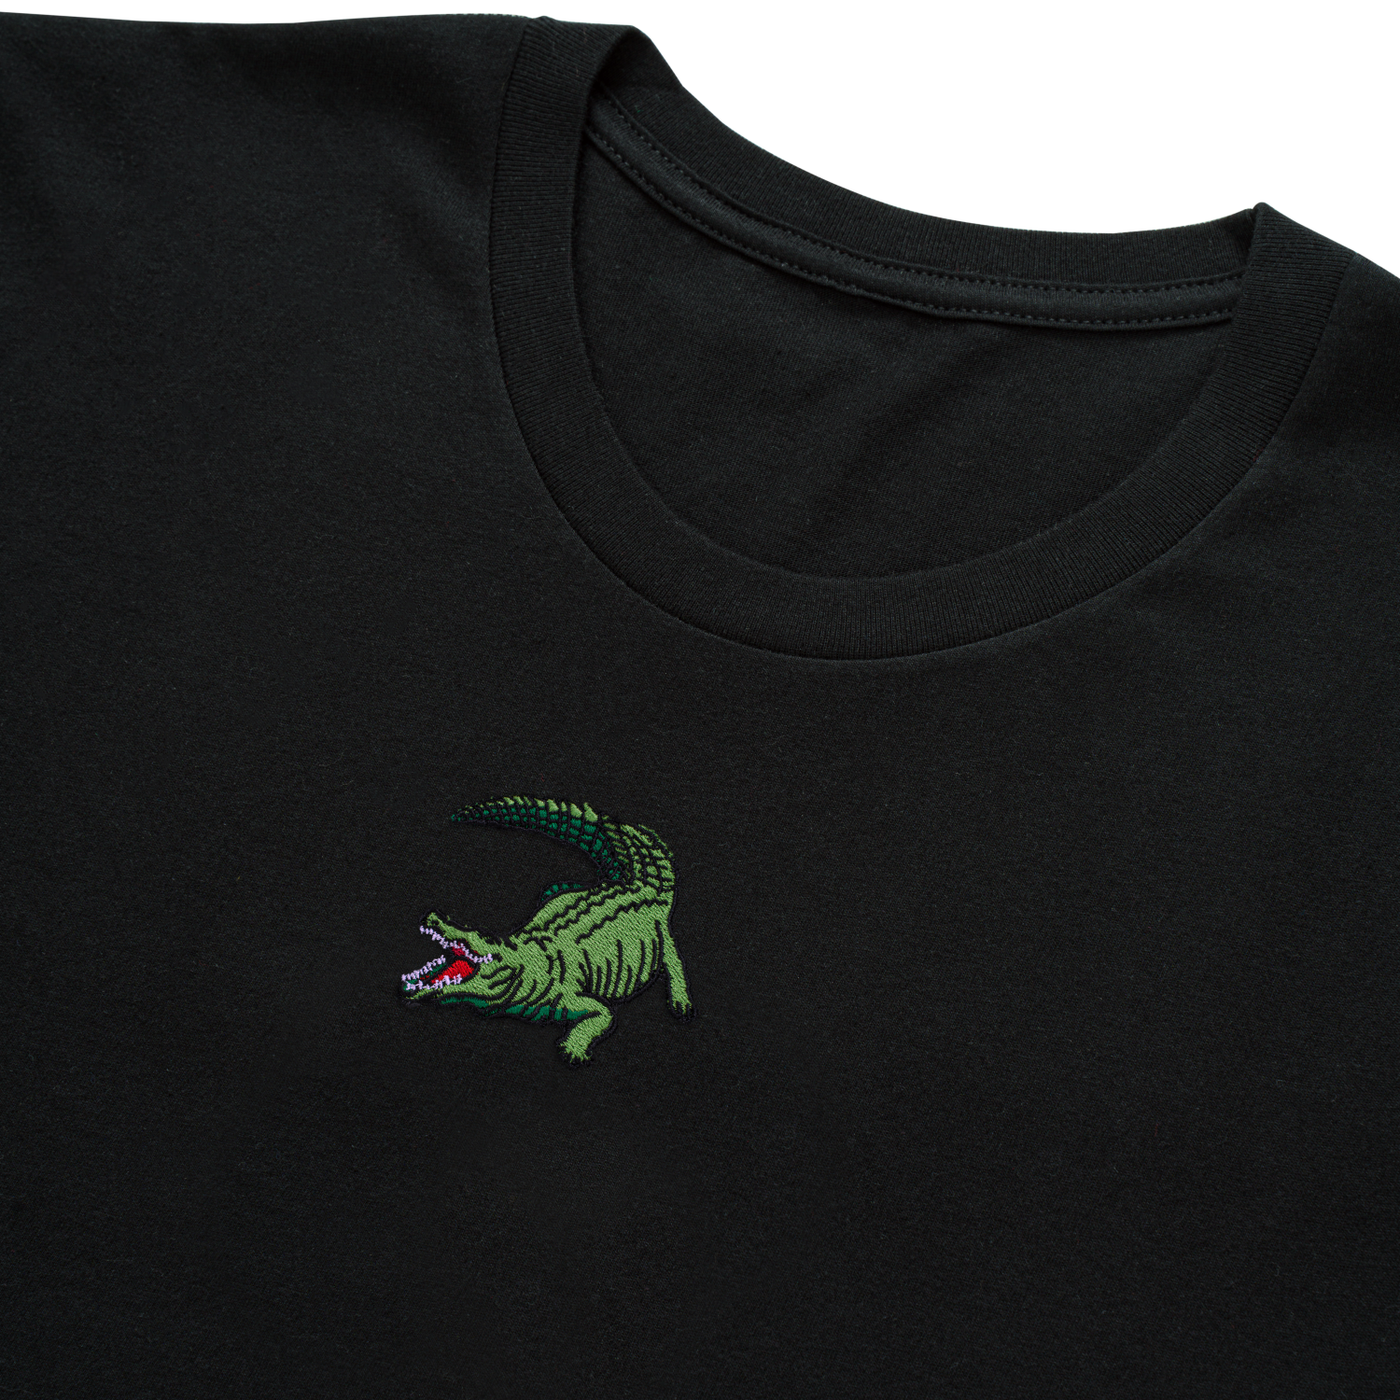 Bobby's Planet Men's Embroidered Saltwater Crocodile T-Shirt from Australia Down Under Animals Collection in Black Color#color_black